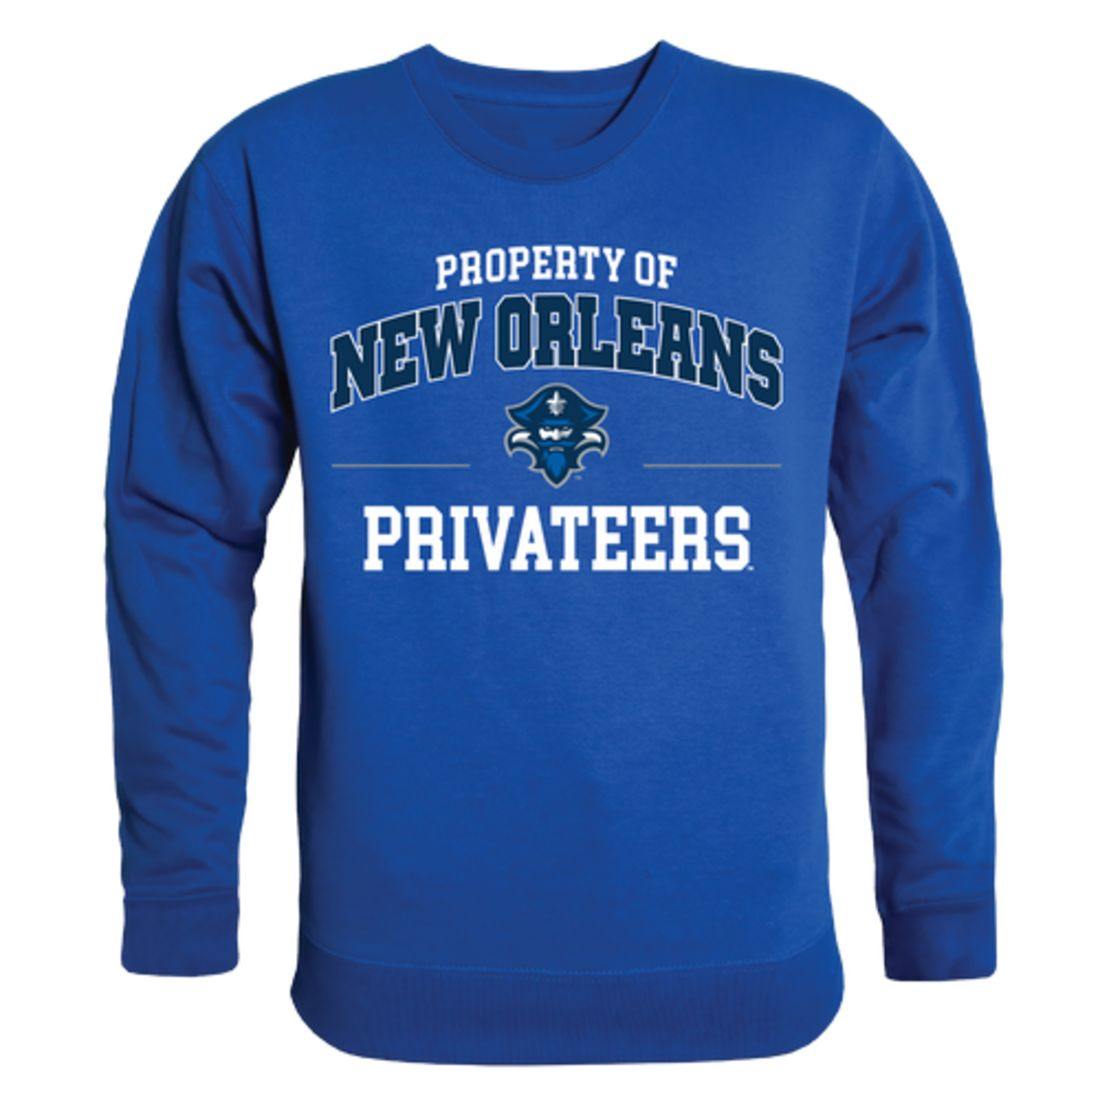 UNO University of New Orleans Privateers Property Crewneck Pullover Sweatshirt Sweater Royal-Campus-Wardrobe